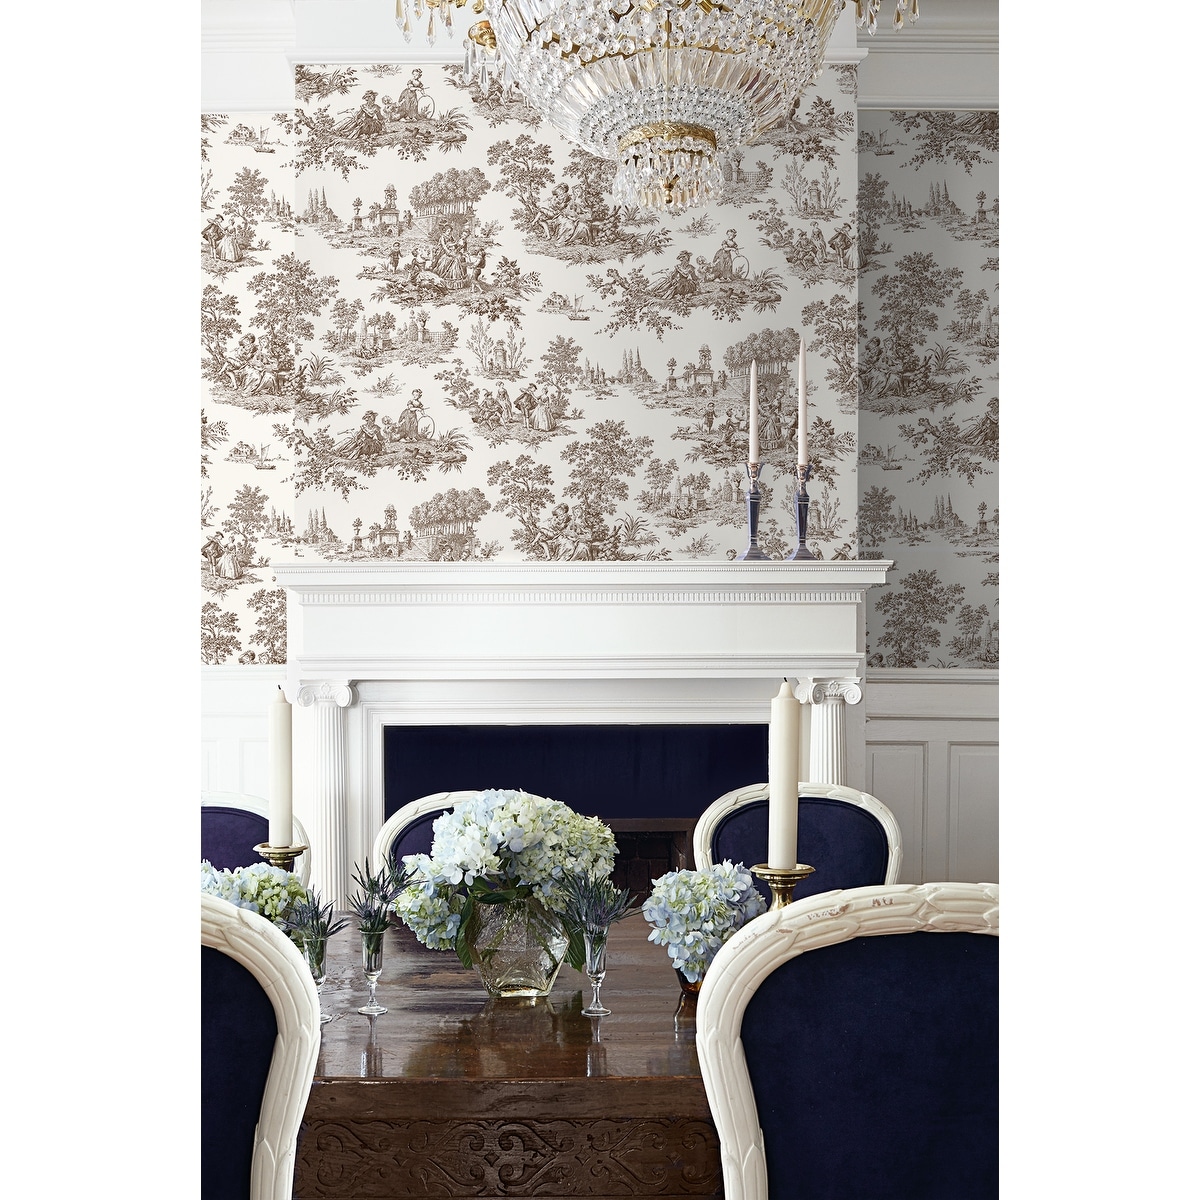 NextWall Chateau Toile Peel and Stick Wallpaper - Bed Bath & Beyond -  35054438